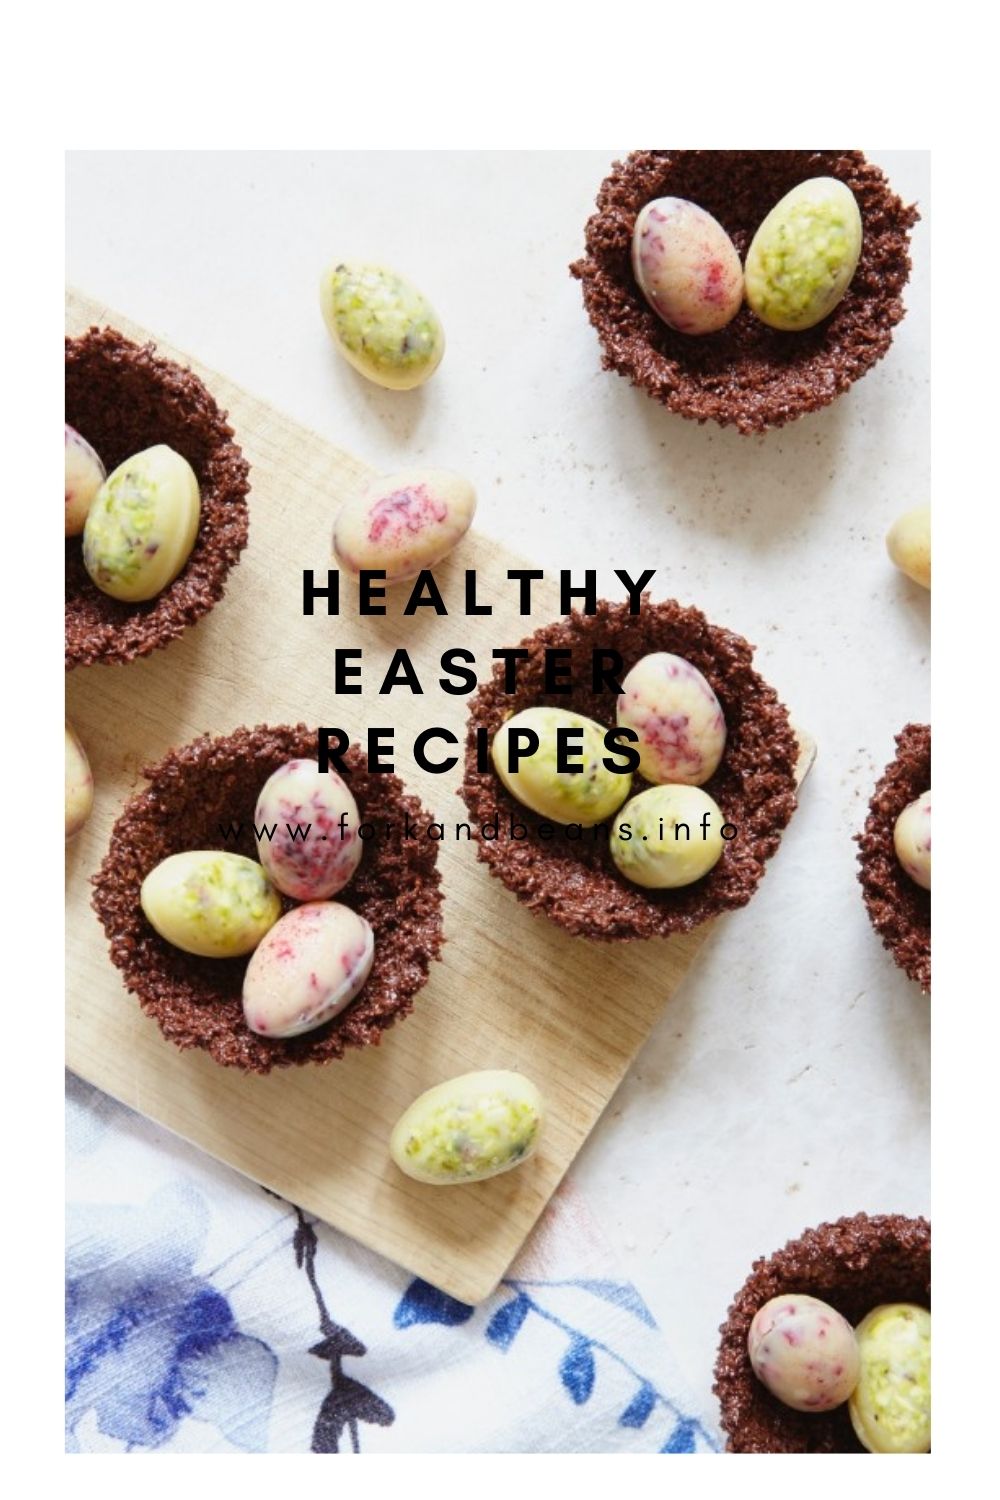 MY HEALTHY EASTER RECIPES